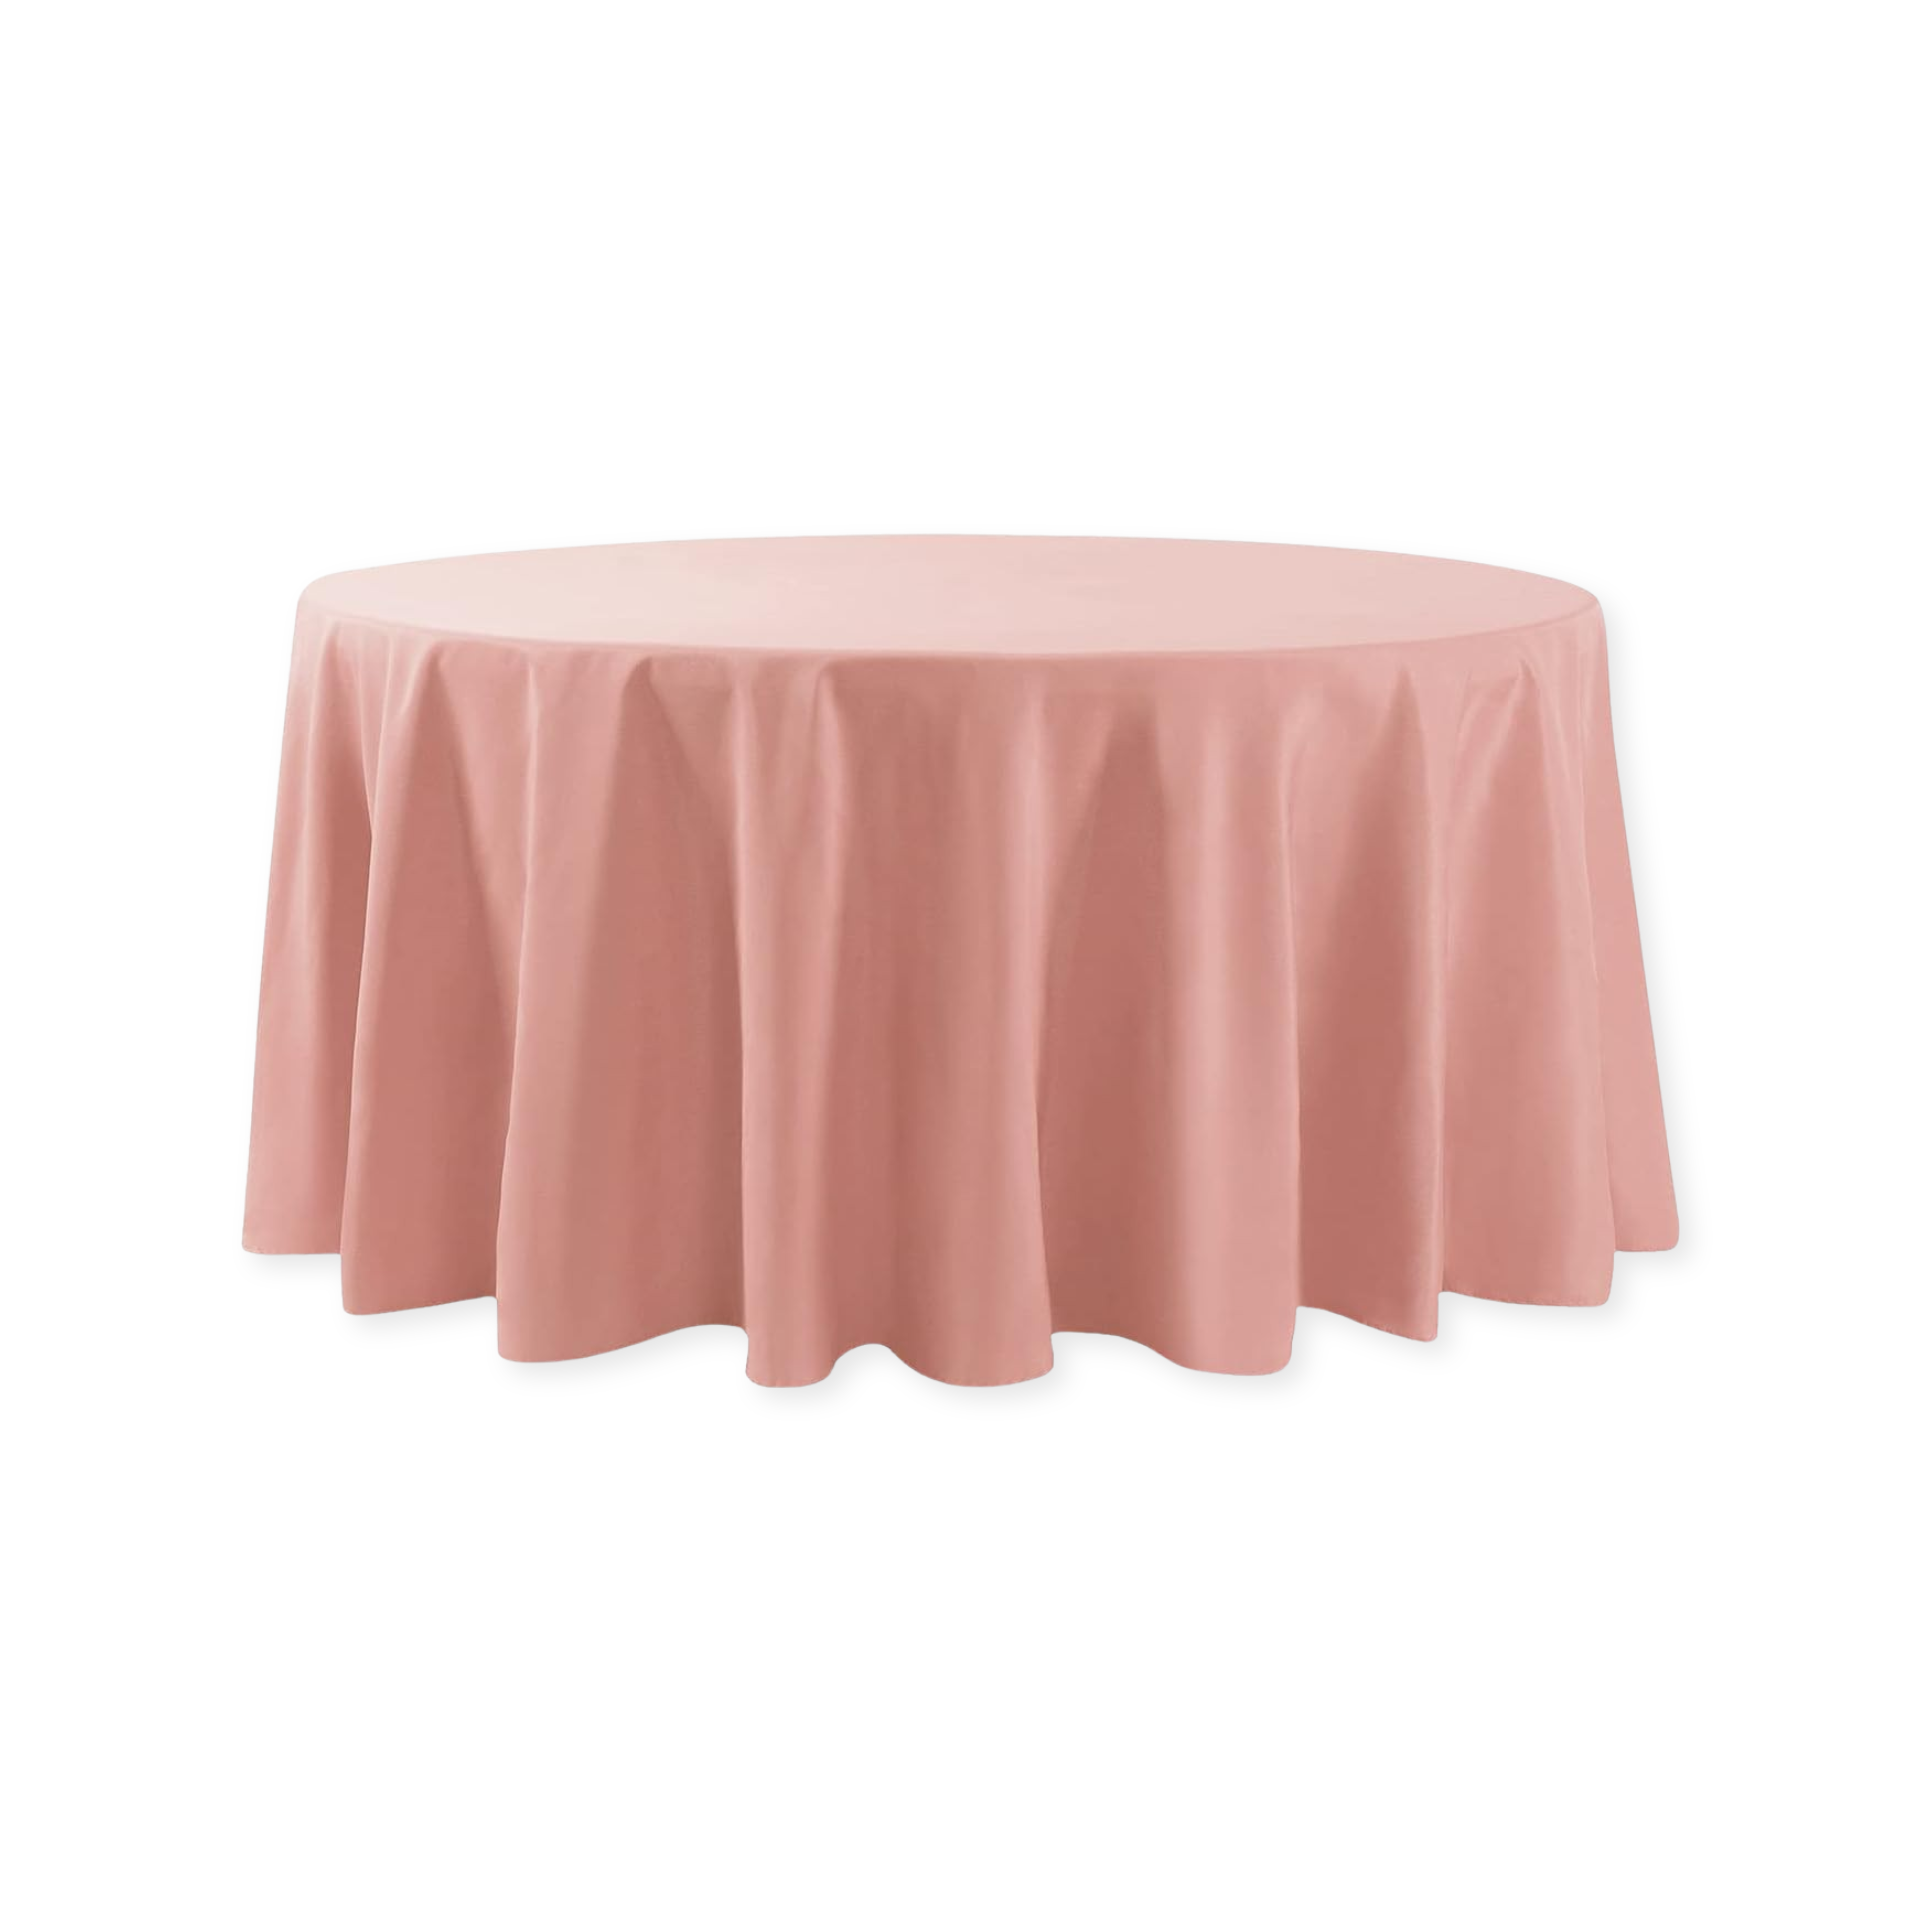 Tablecloth polyester round dusty rose commercial grade wedding party event rental panama city beach